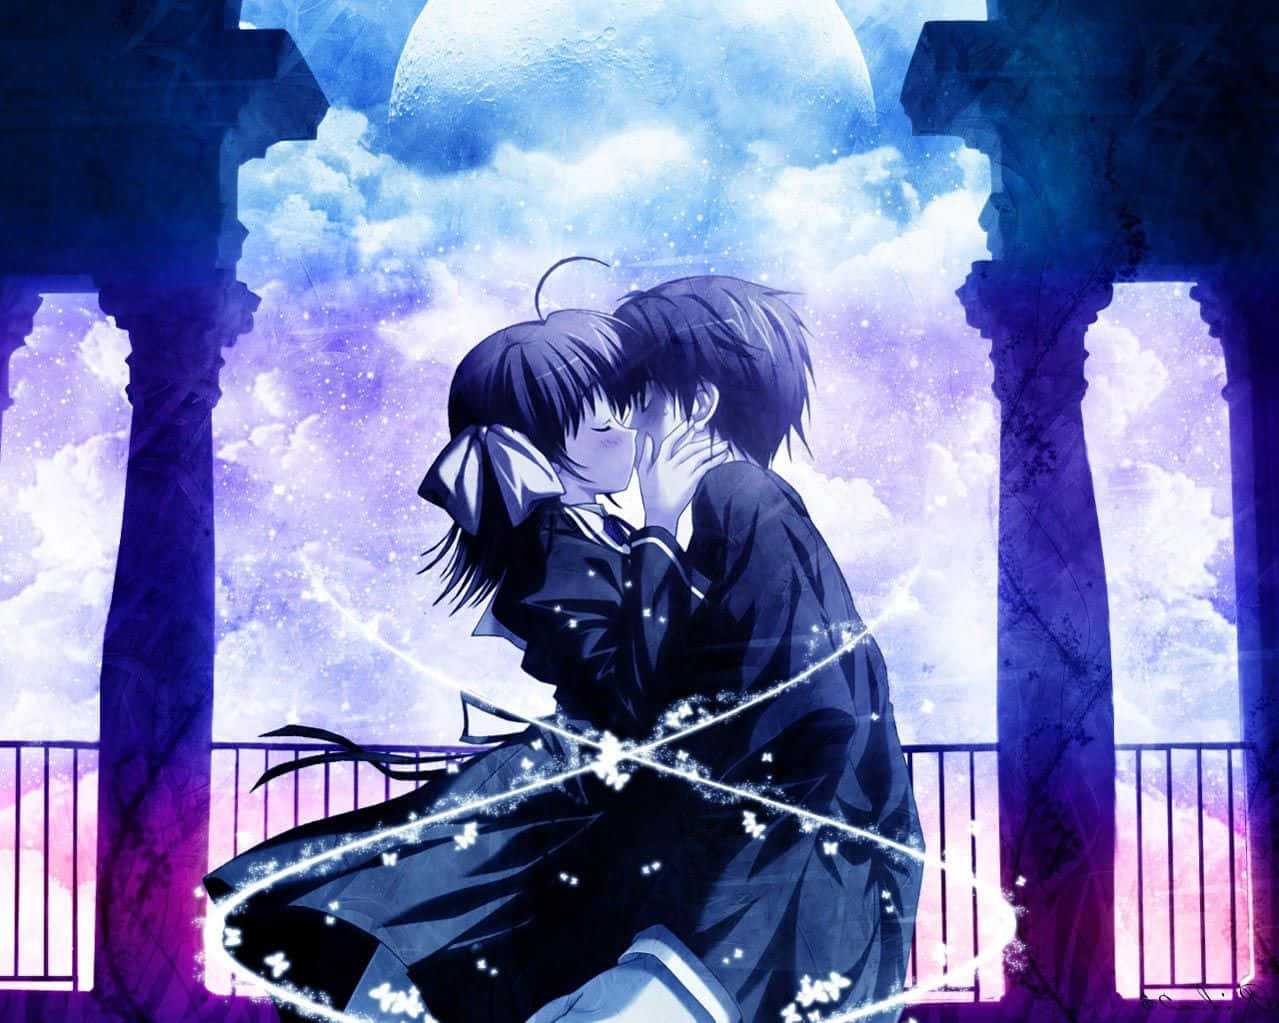 Magical Anime Love Kiss Picture